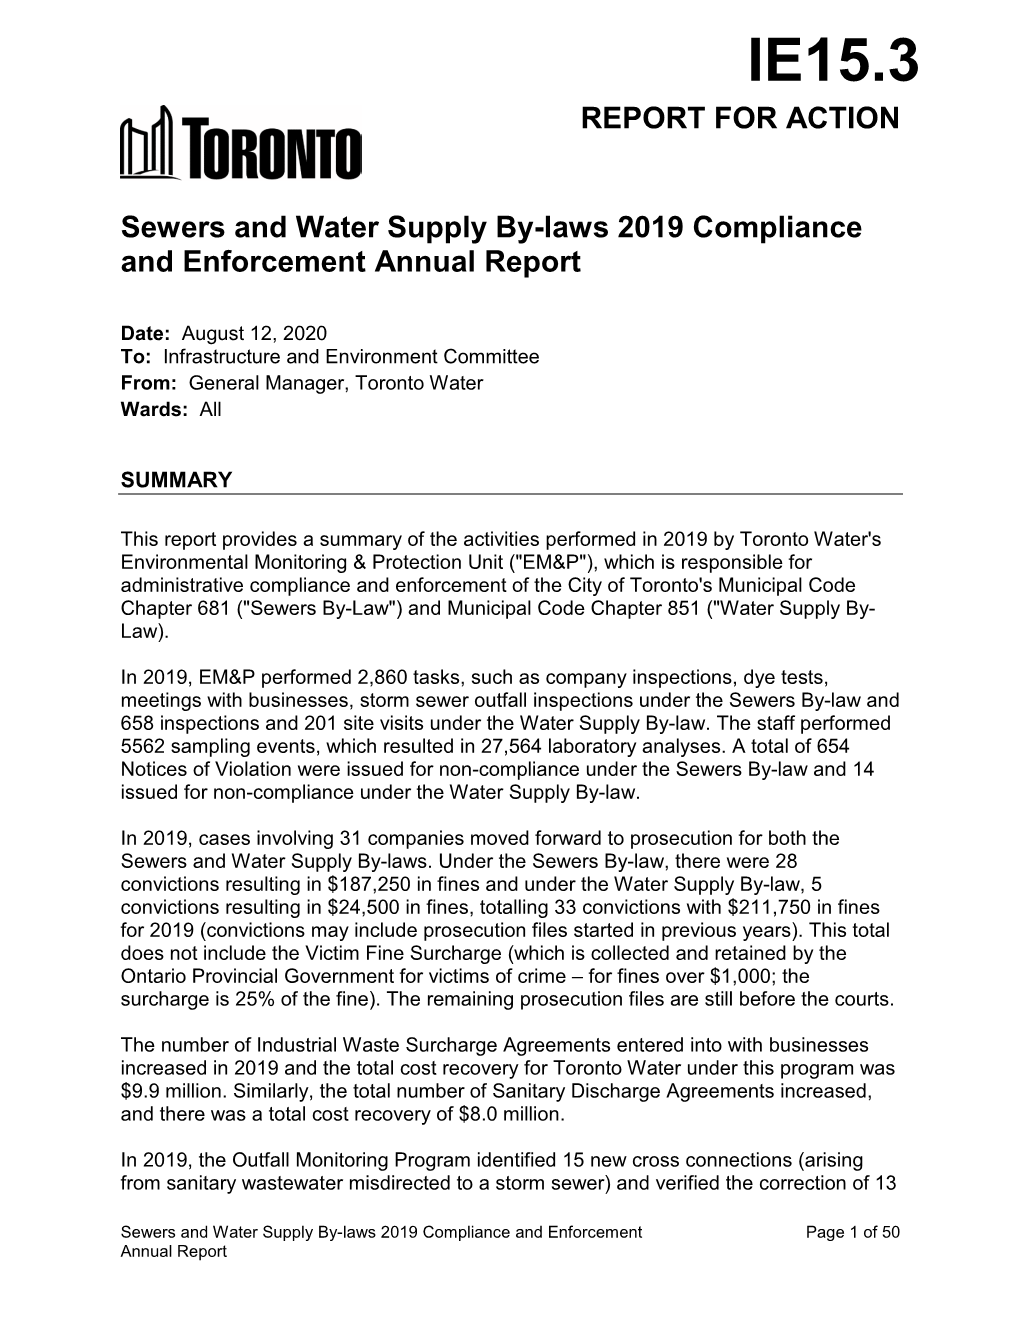 Sewers and Water Supply By-Laws 2019 Compliance and Enforcement Annual Report